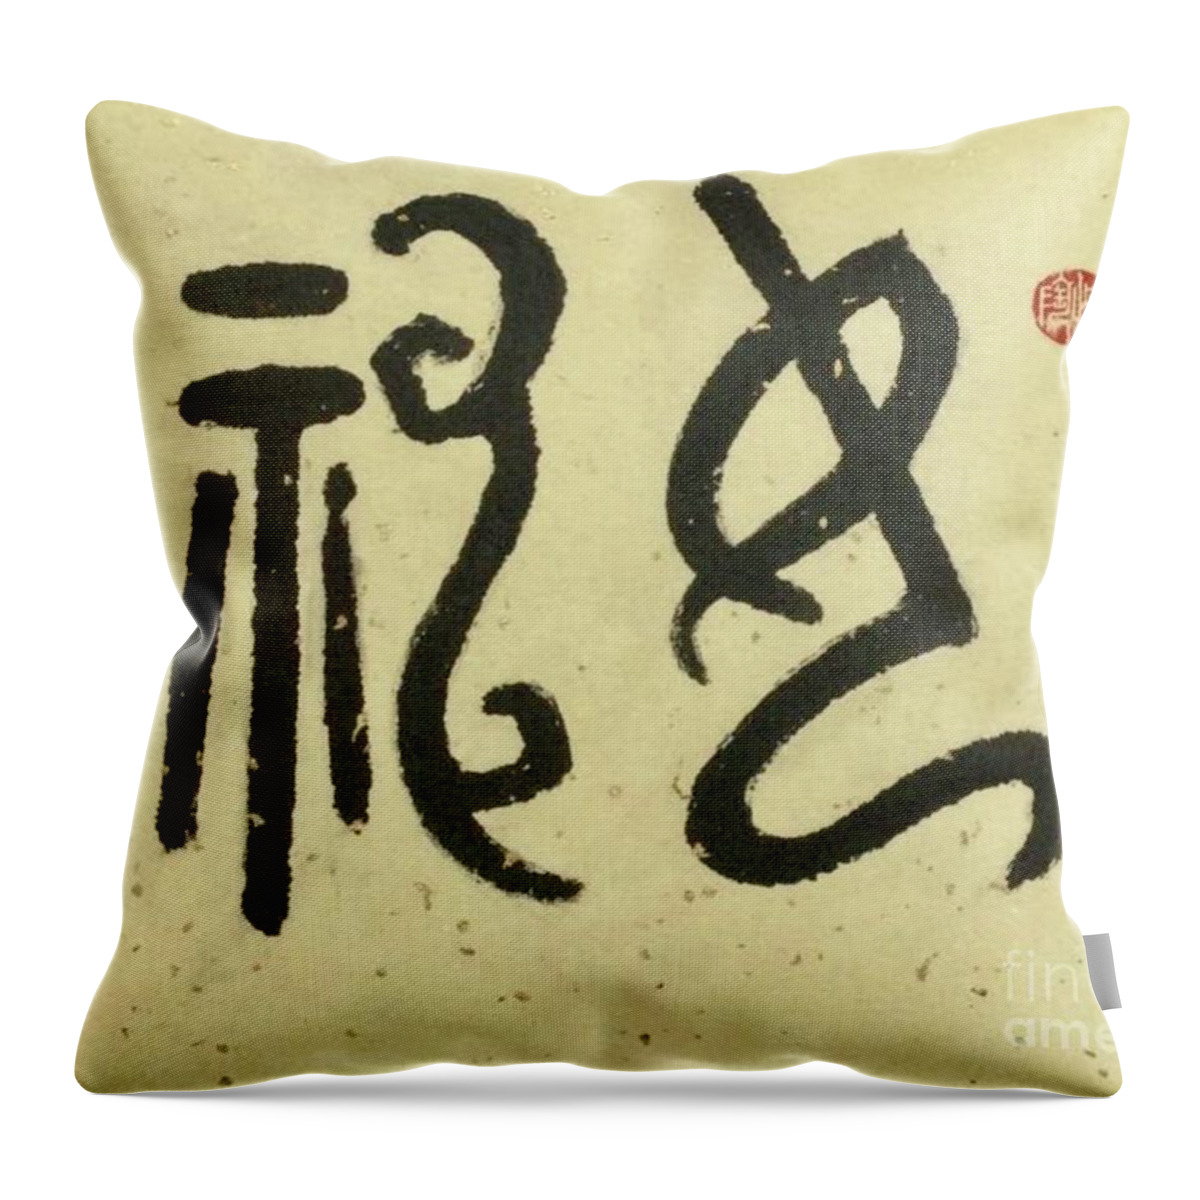 Oracle Bone Goddess Throw Pillow featuring the painting Calligraphy - 77 Oracle Bone Goddess by Carmen Lam